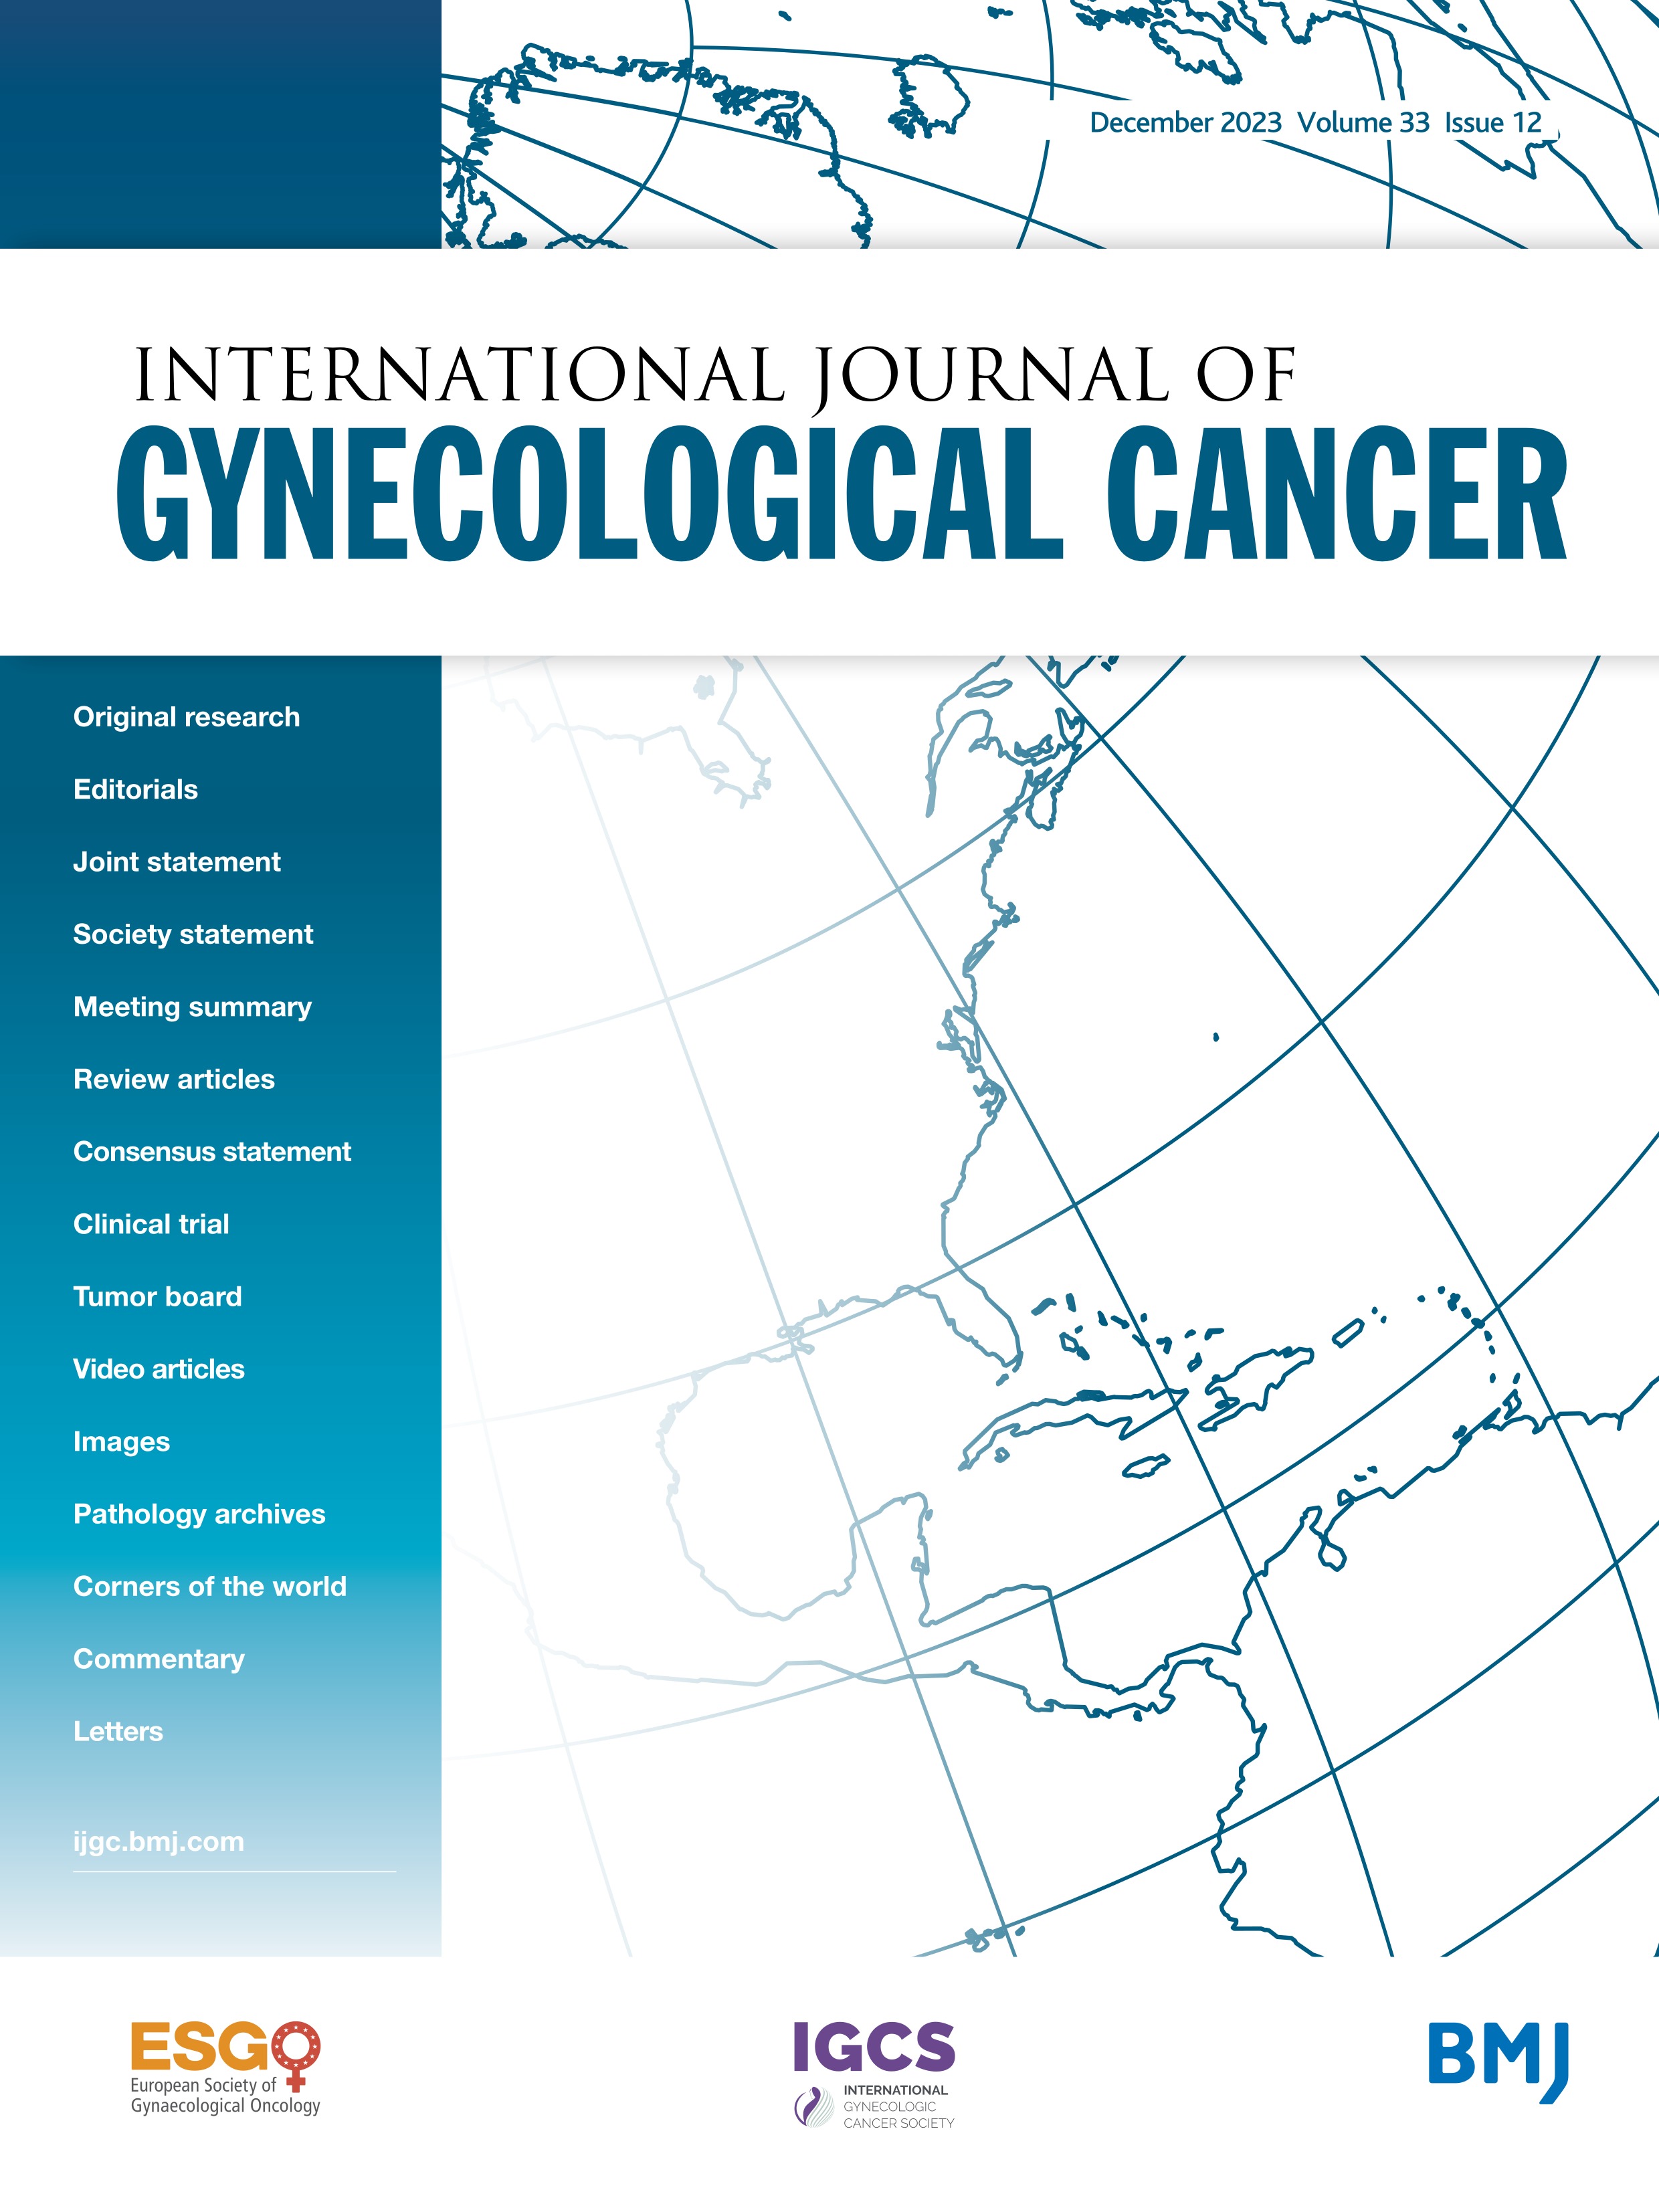 Survival after sentinel lymph node biopsy for early cervical cancers: a systematic review and meta-analysis